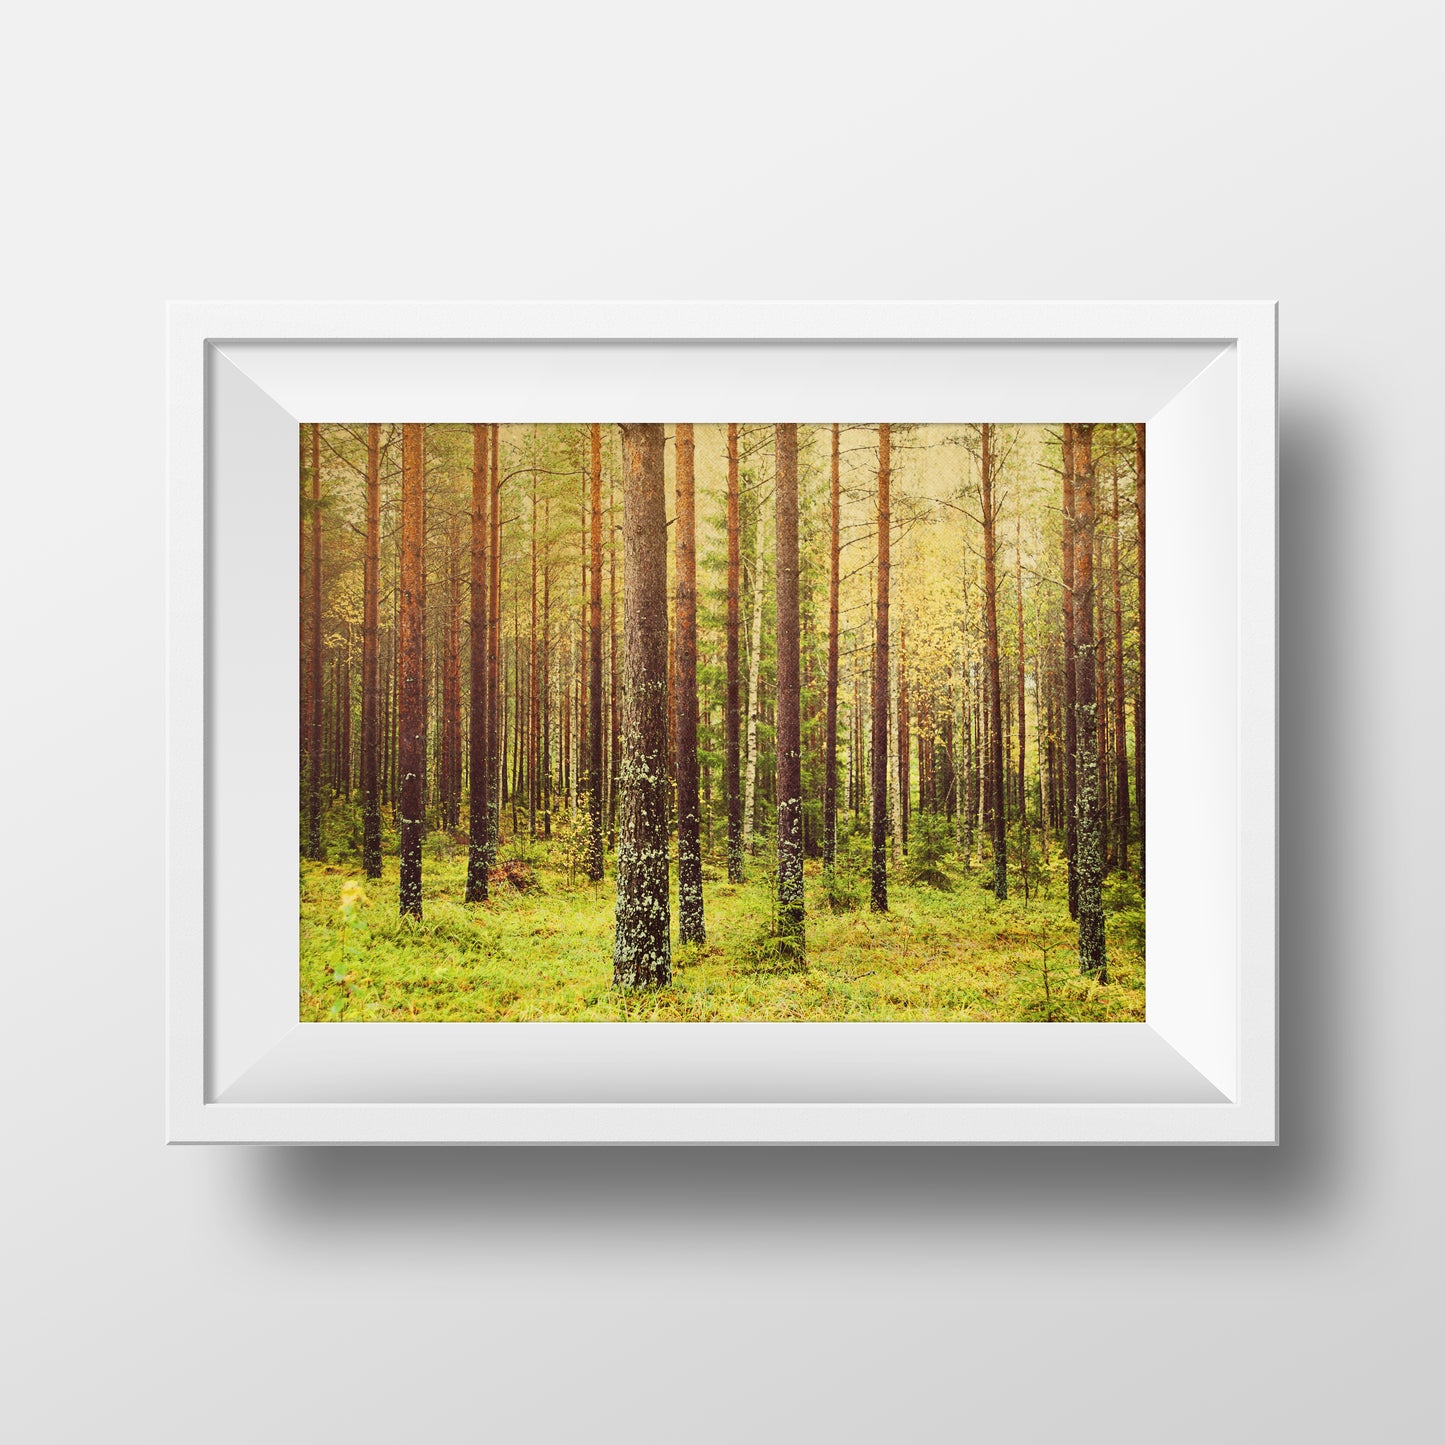 Forest (metsä) in Finland  Limited Edition Archival Fine Art Chromogenic Print